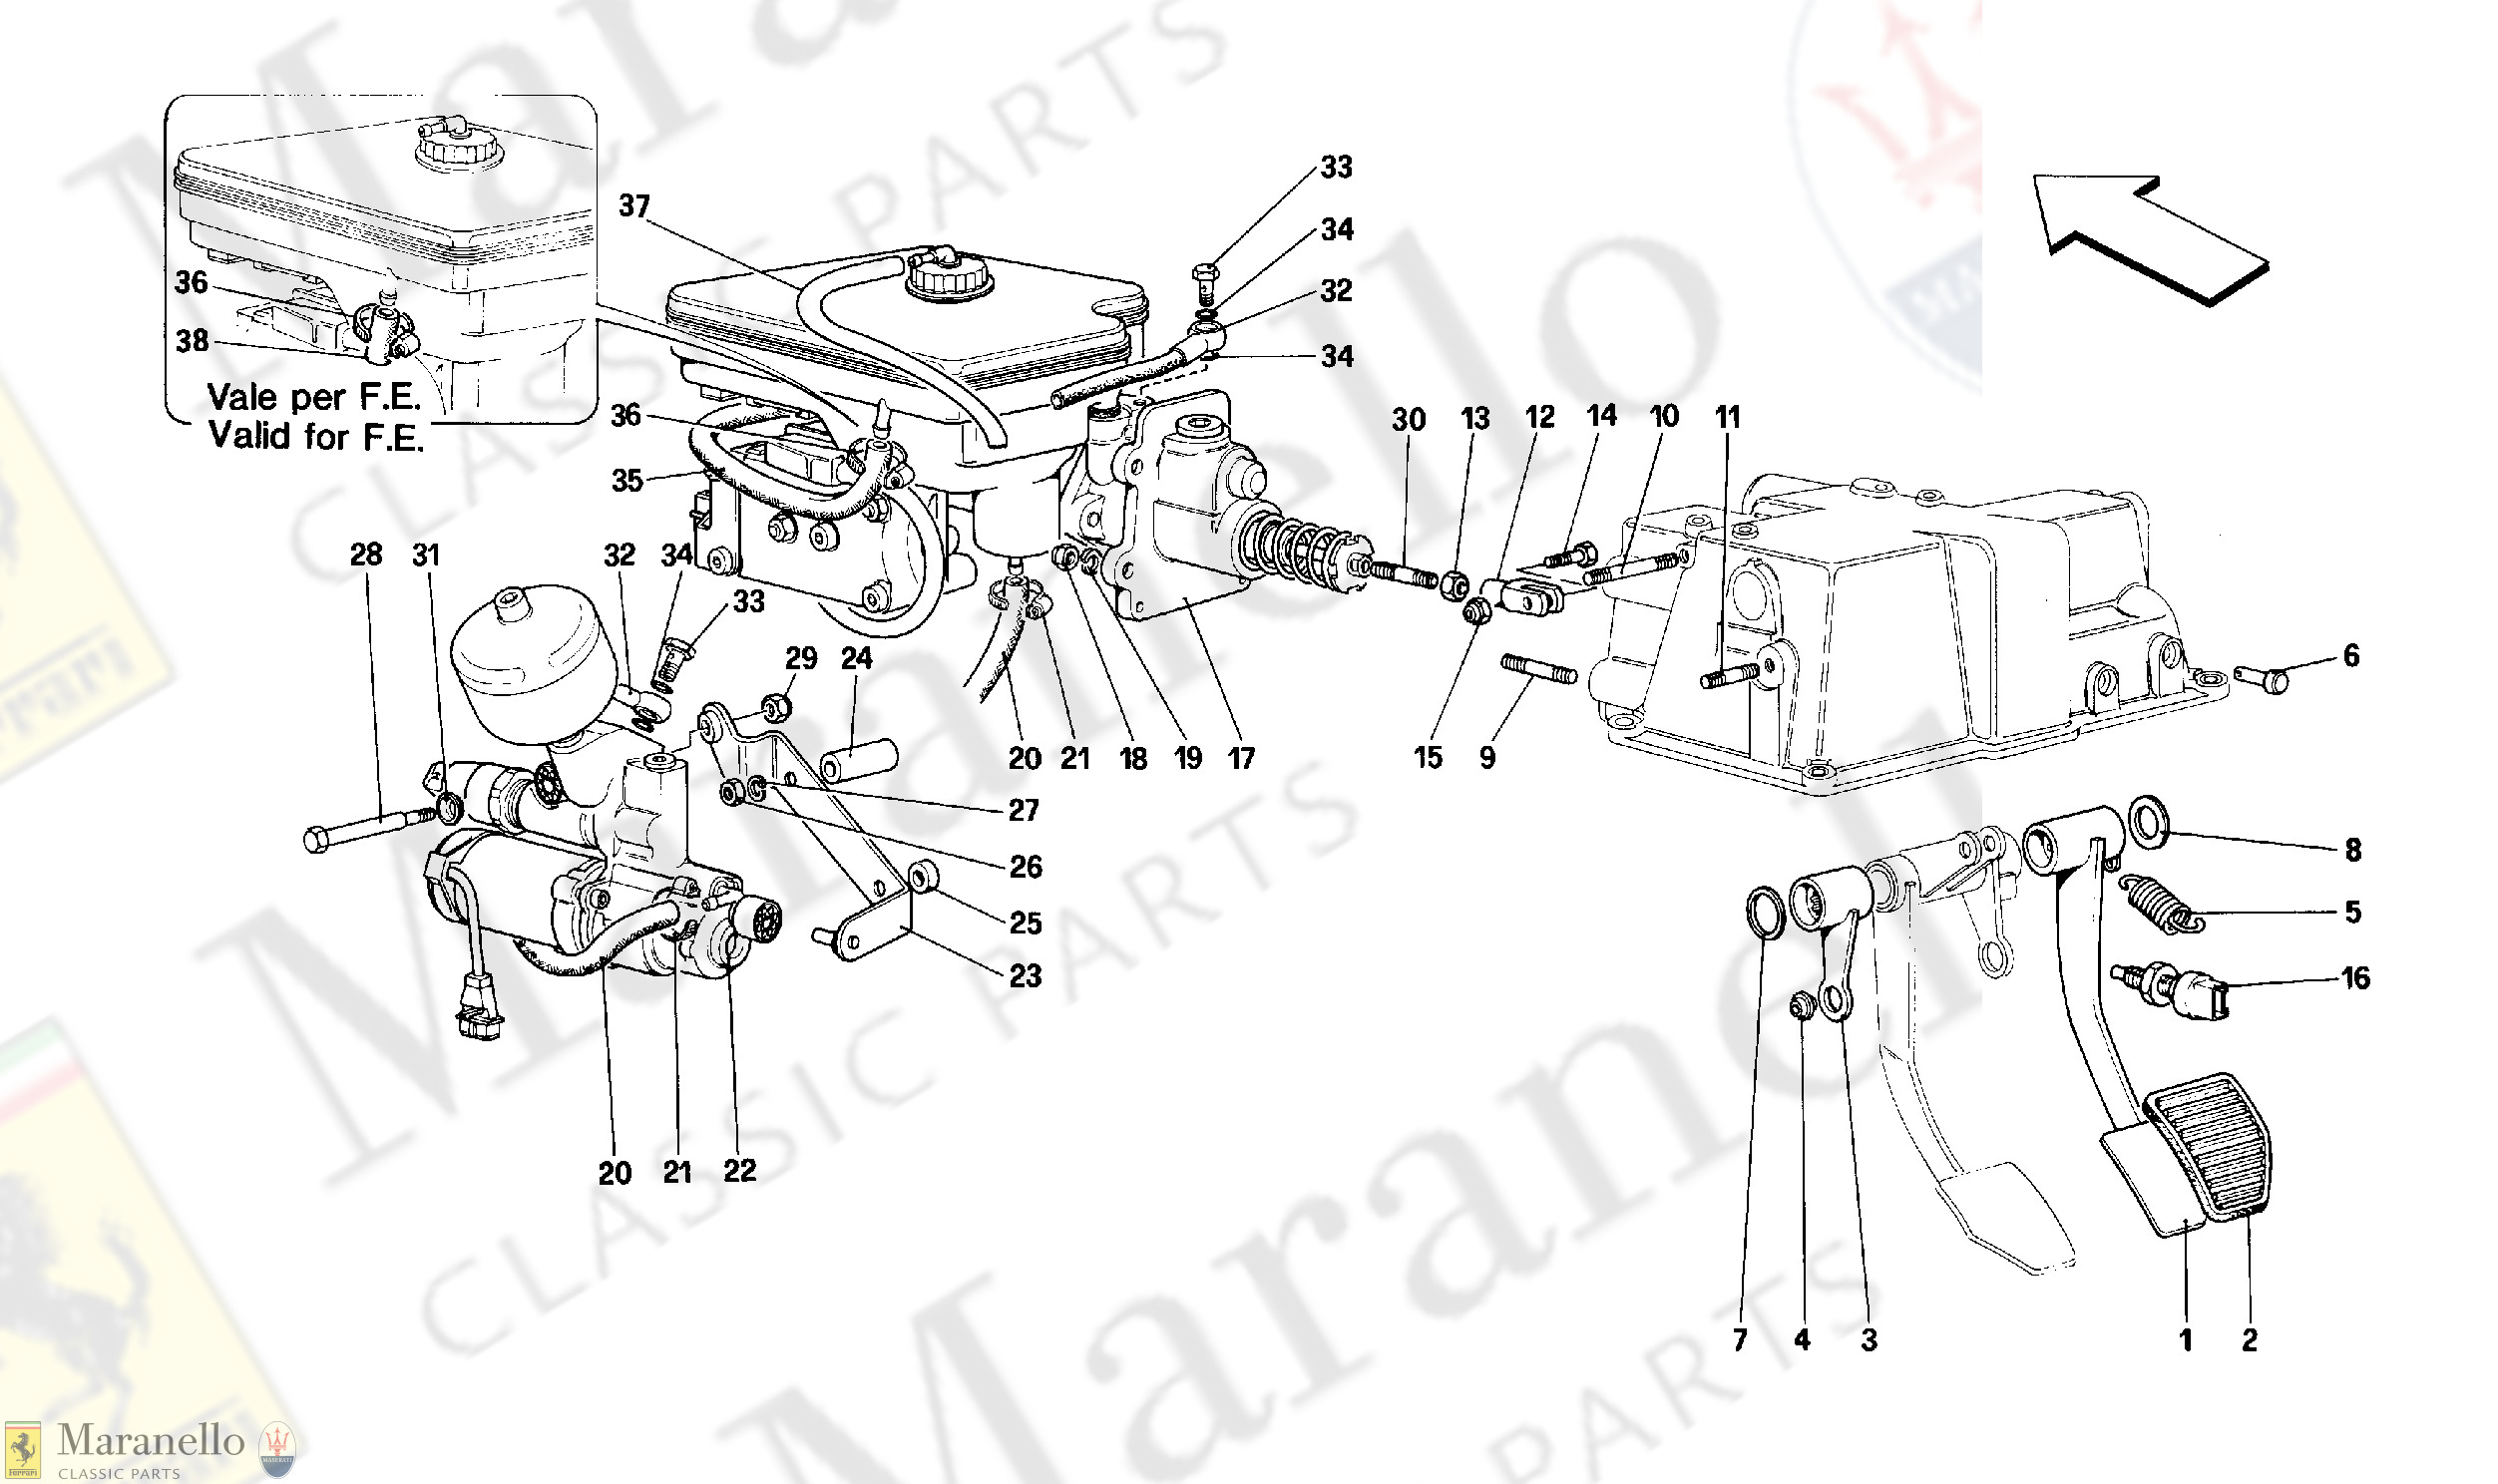 043 - Brake Hydraulic System -Valid For Gs-